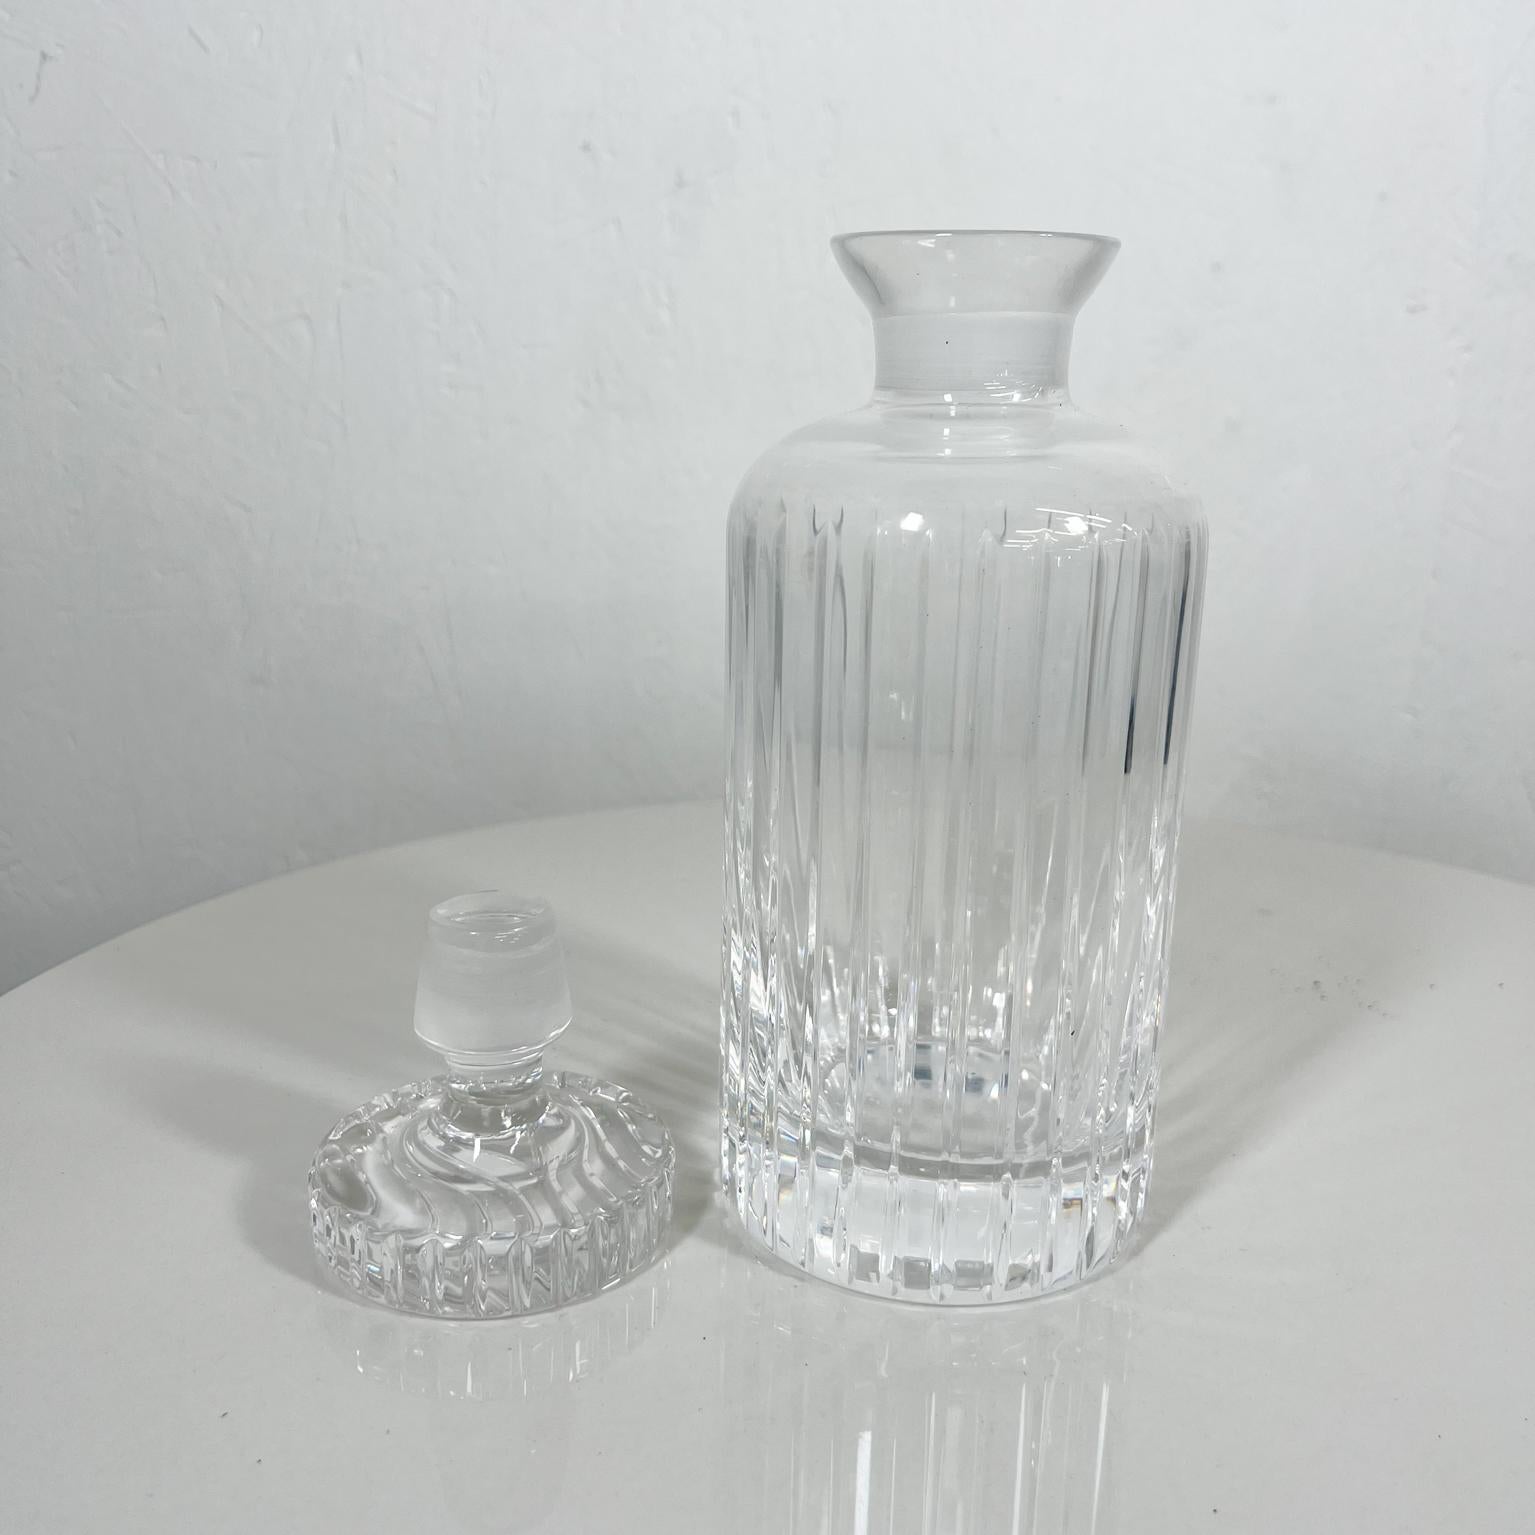 1960s Modern Ribbed Crystal Glass Decanter from Italy For Sale 3